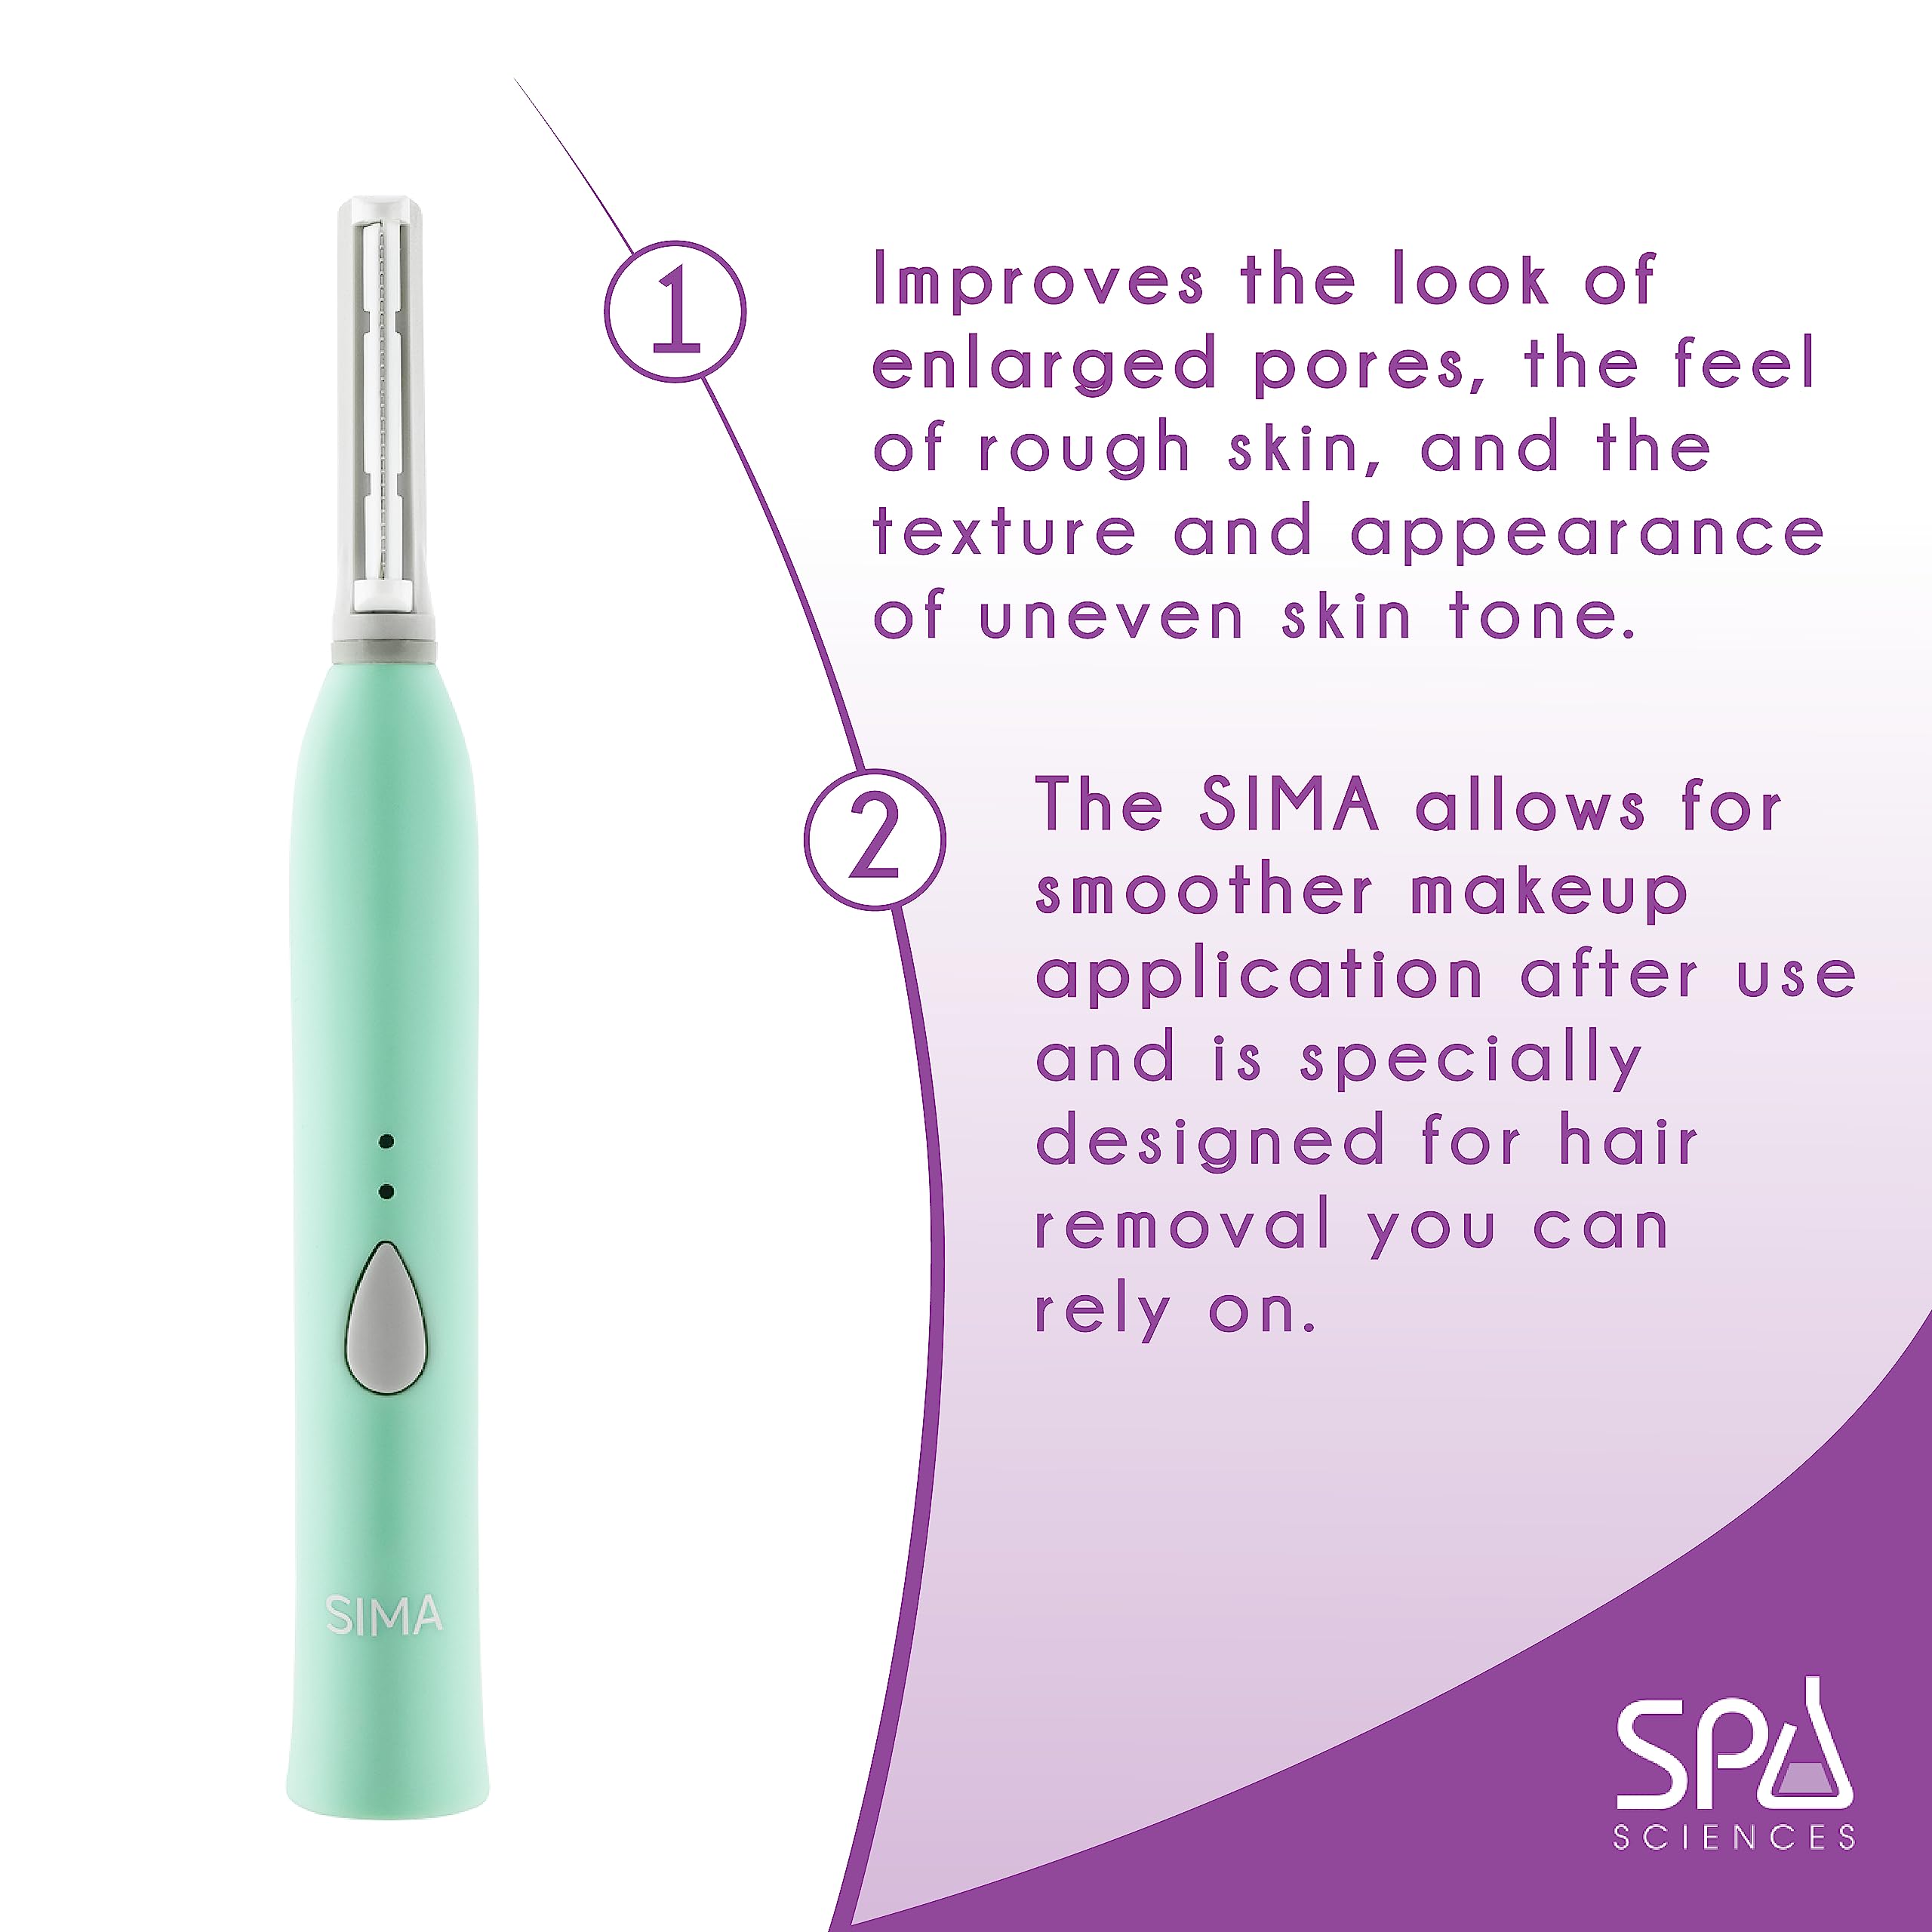 SPA SCIENCES - SIMA Dermaplaning Tool - Patented Painless 2 in 1 Facial Exfoliation & Peach Fuzz-Hair Removal System w/ 7 Weeks Treatment Included - Anti-Aging – 3 Speeds - Rechargeable